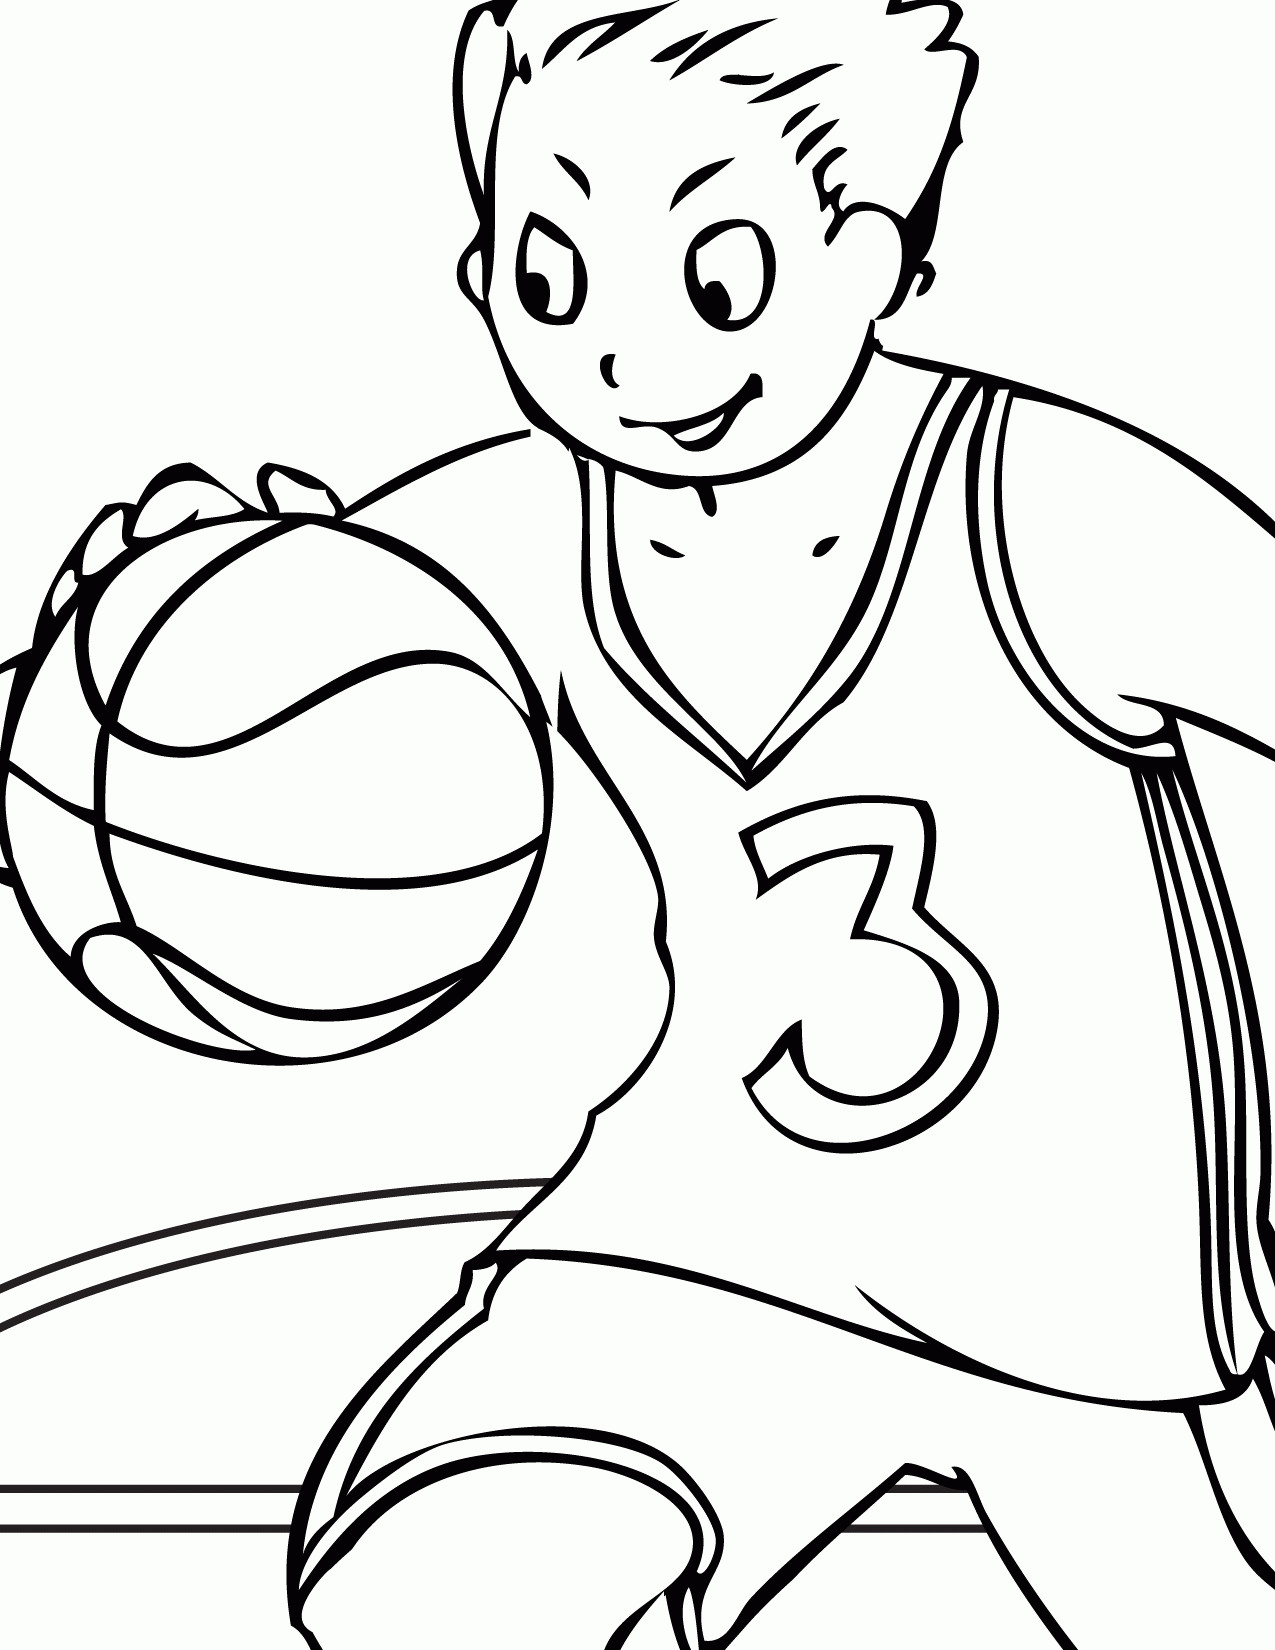 Home Coloring Pages For Boys
 Basketball Coloring Pages For Boys Coloring Home